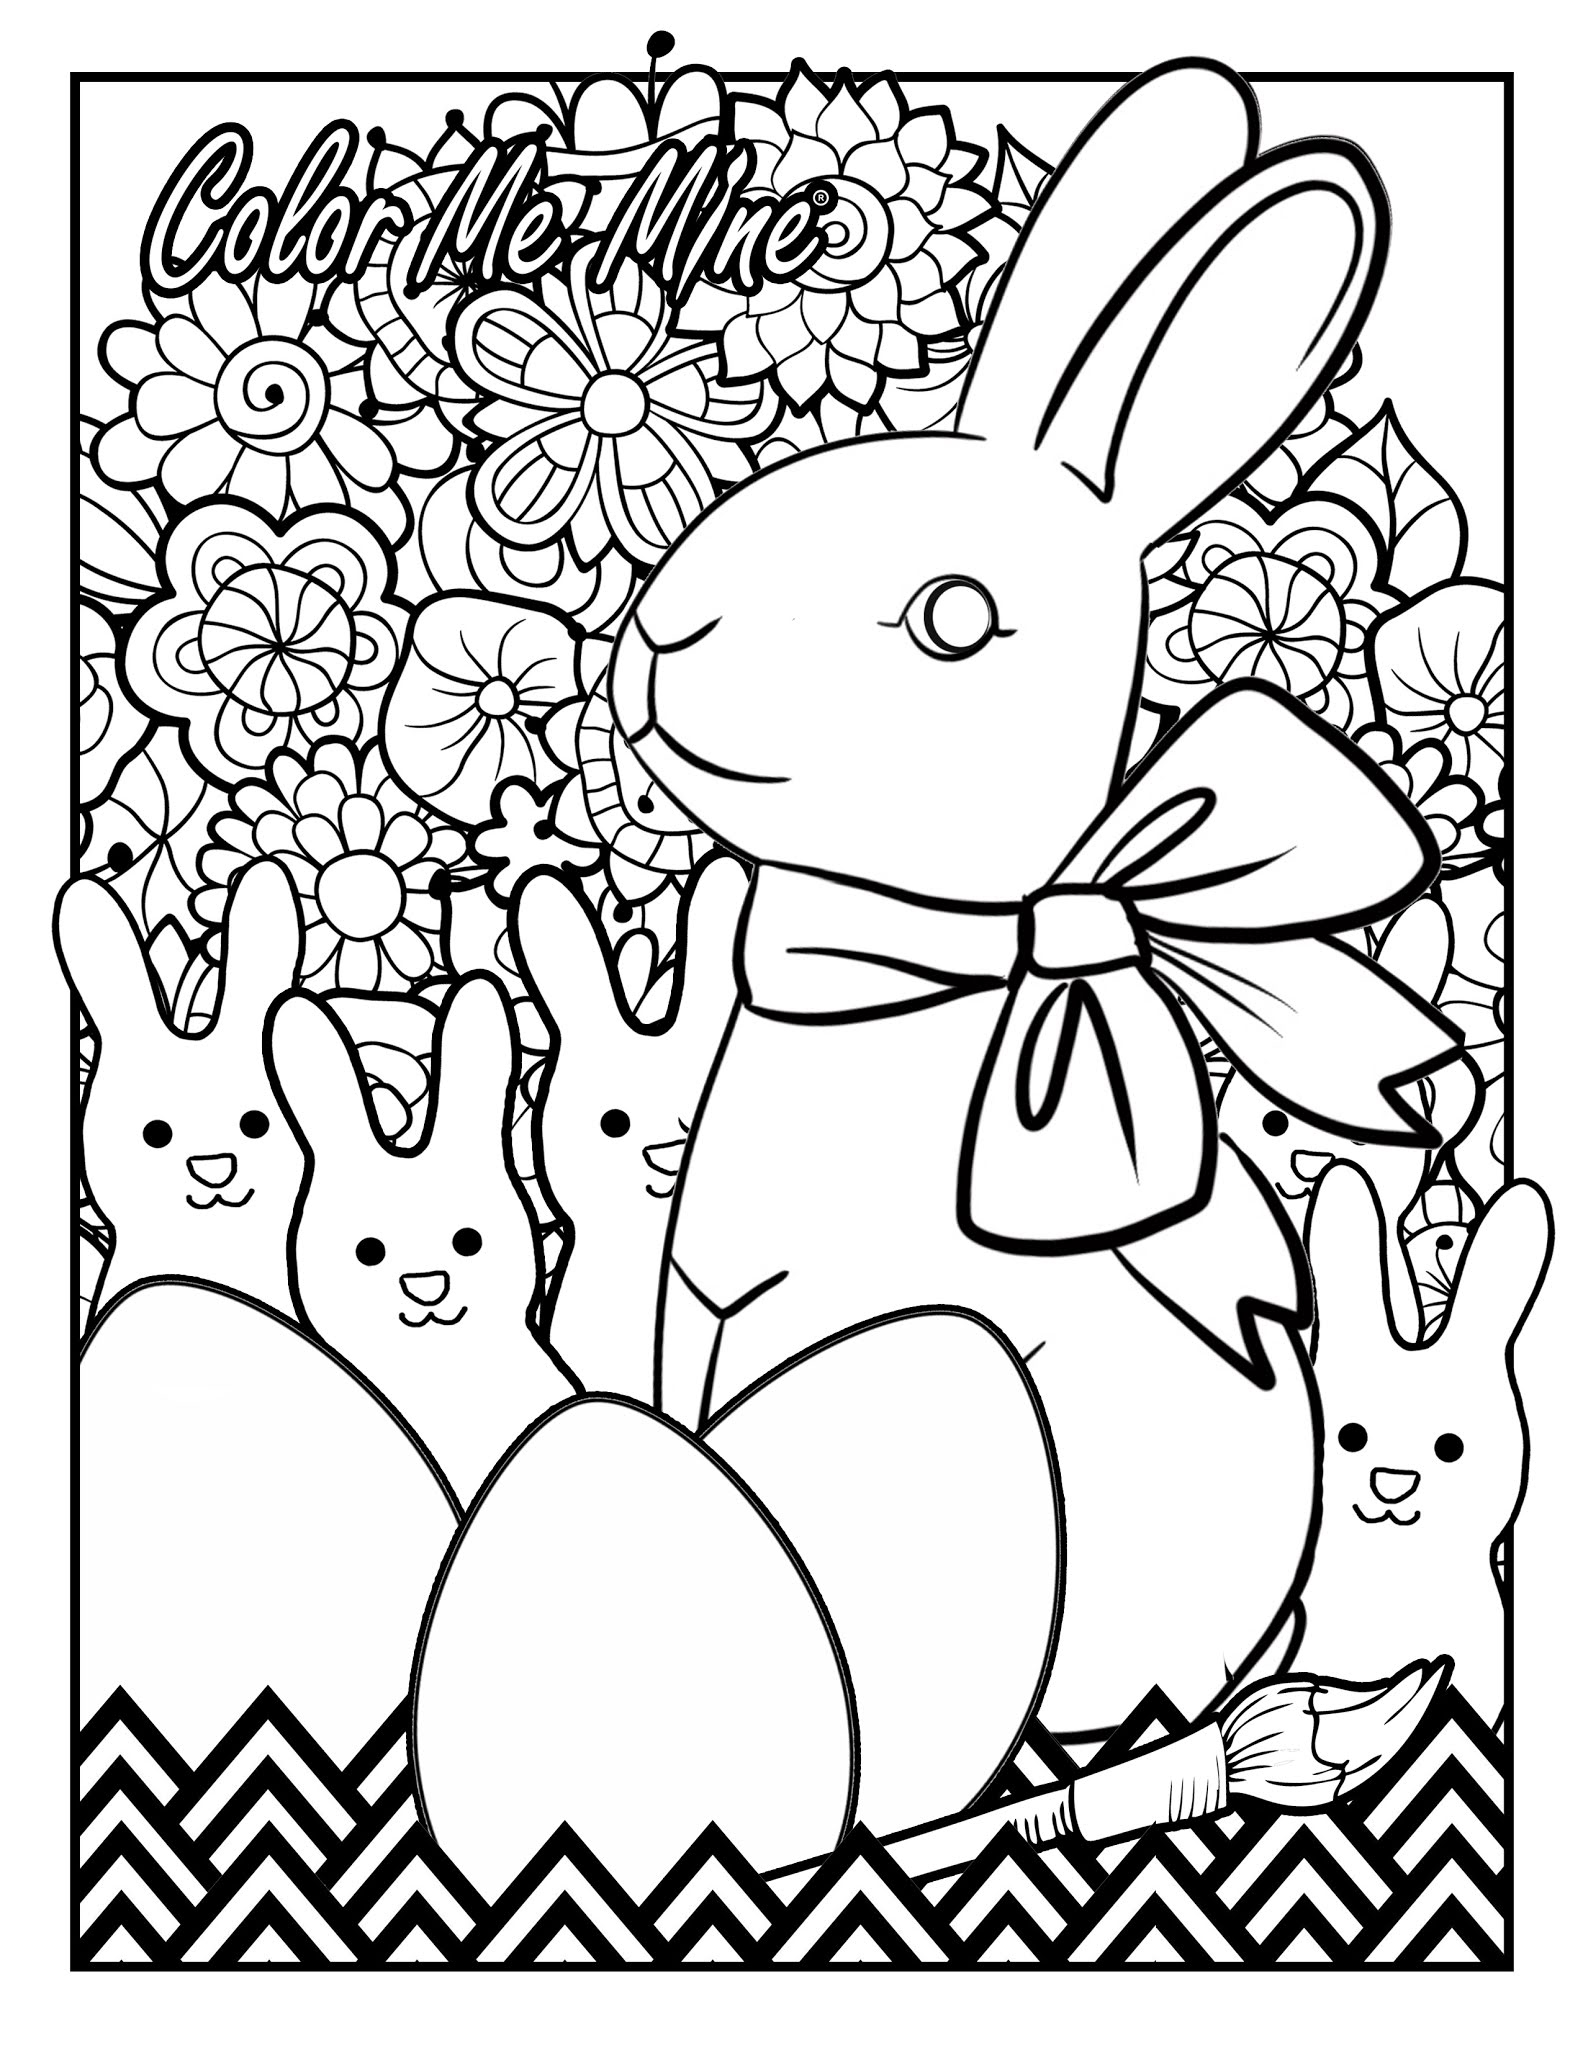 NEW* Easter Coloring Page – Denville